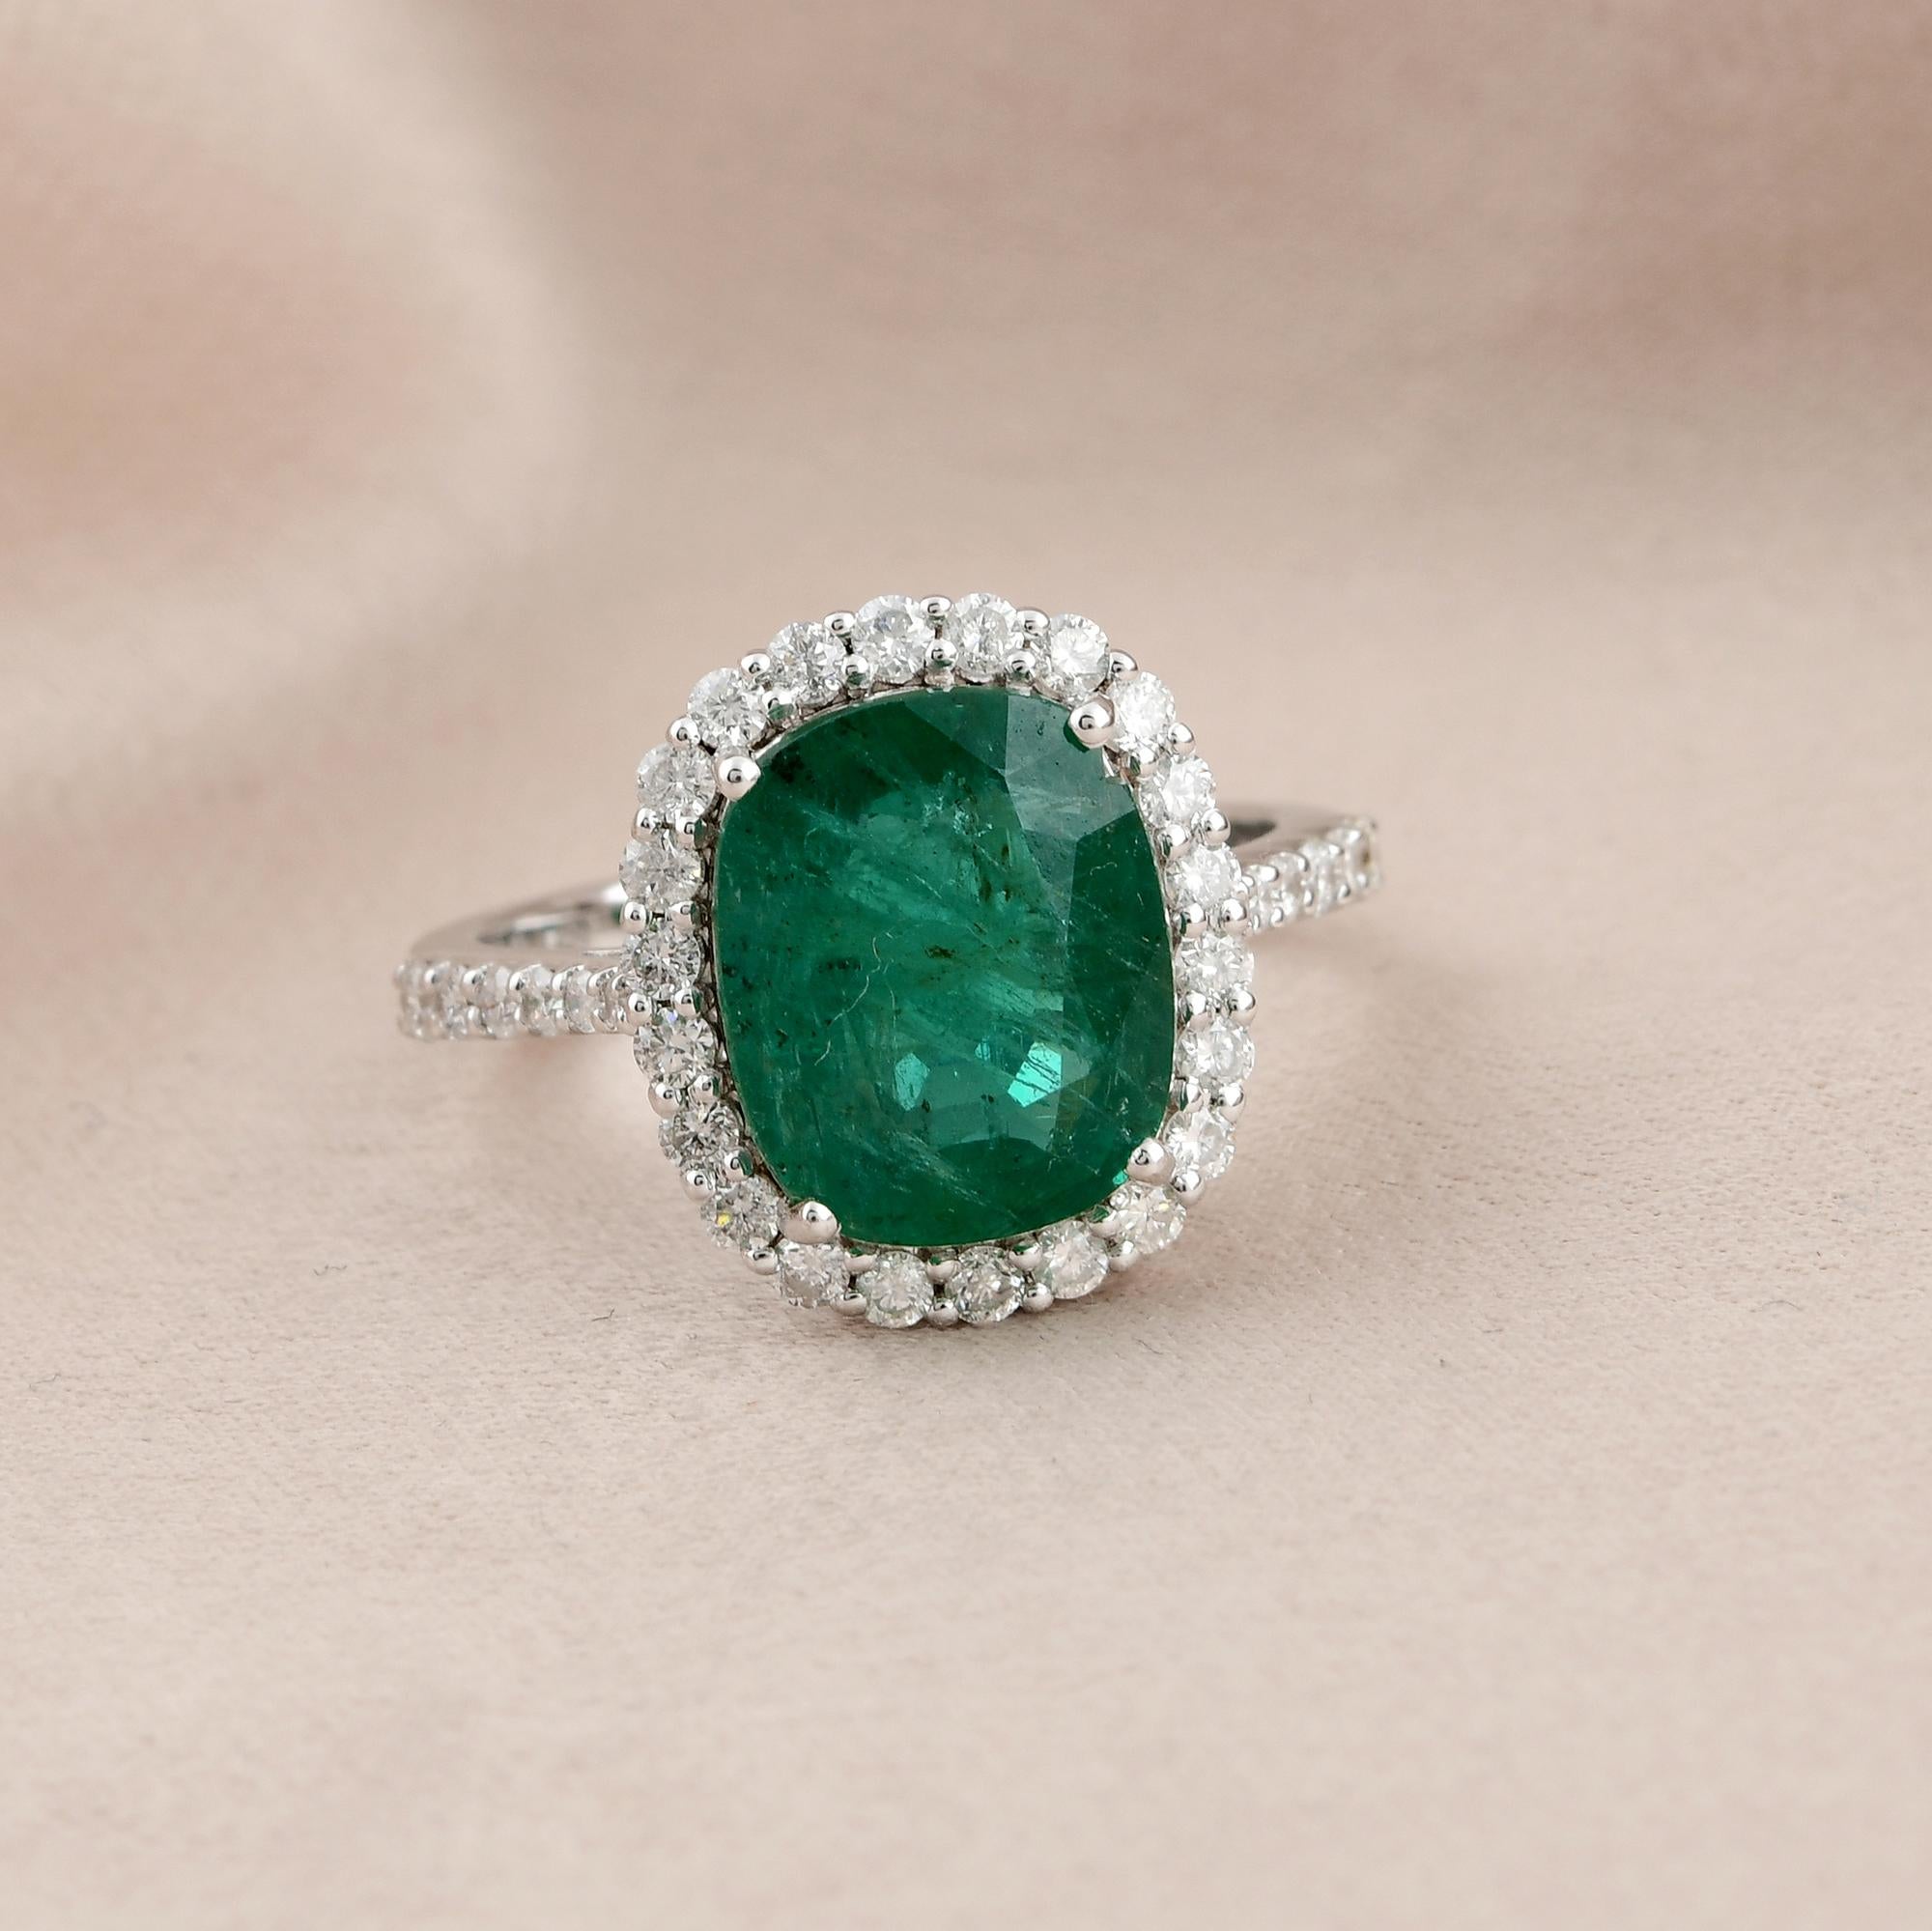 Oval Cut Zambian Emerald Gemstone Cocktail Ring Diamond 18 Kt White Gold Handmade Jewelry For Sale